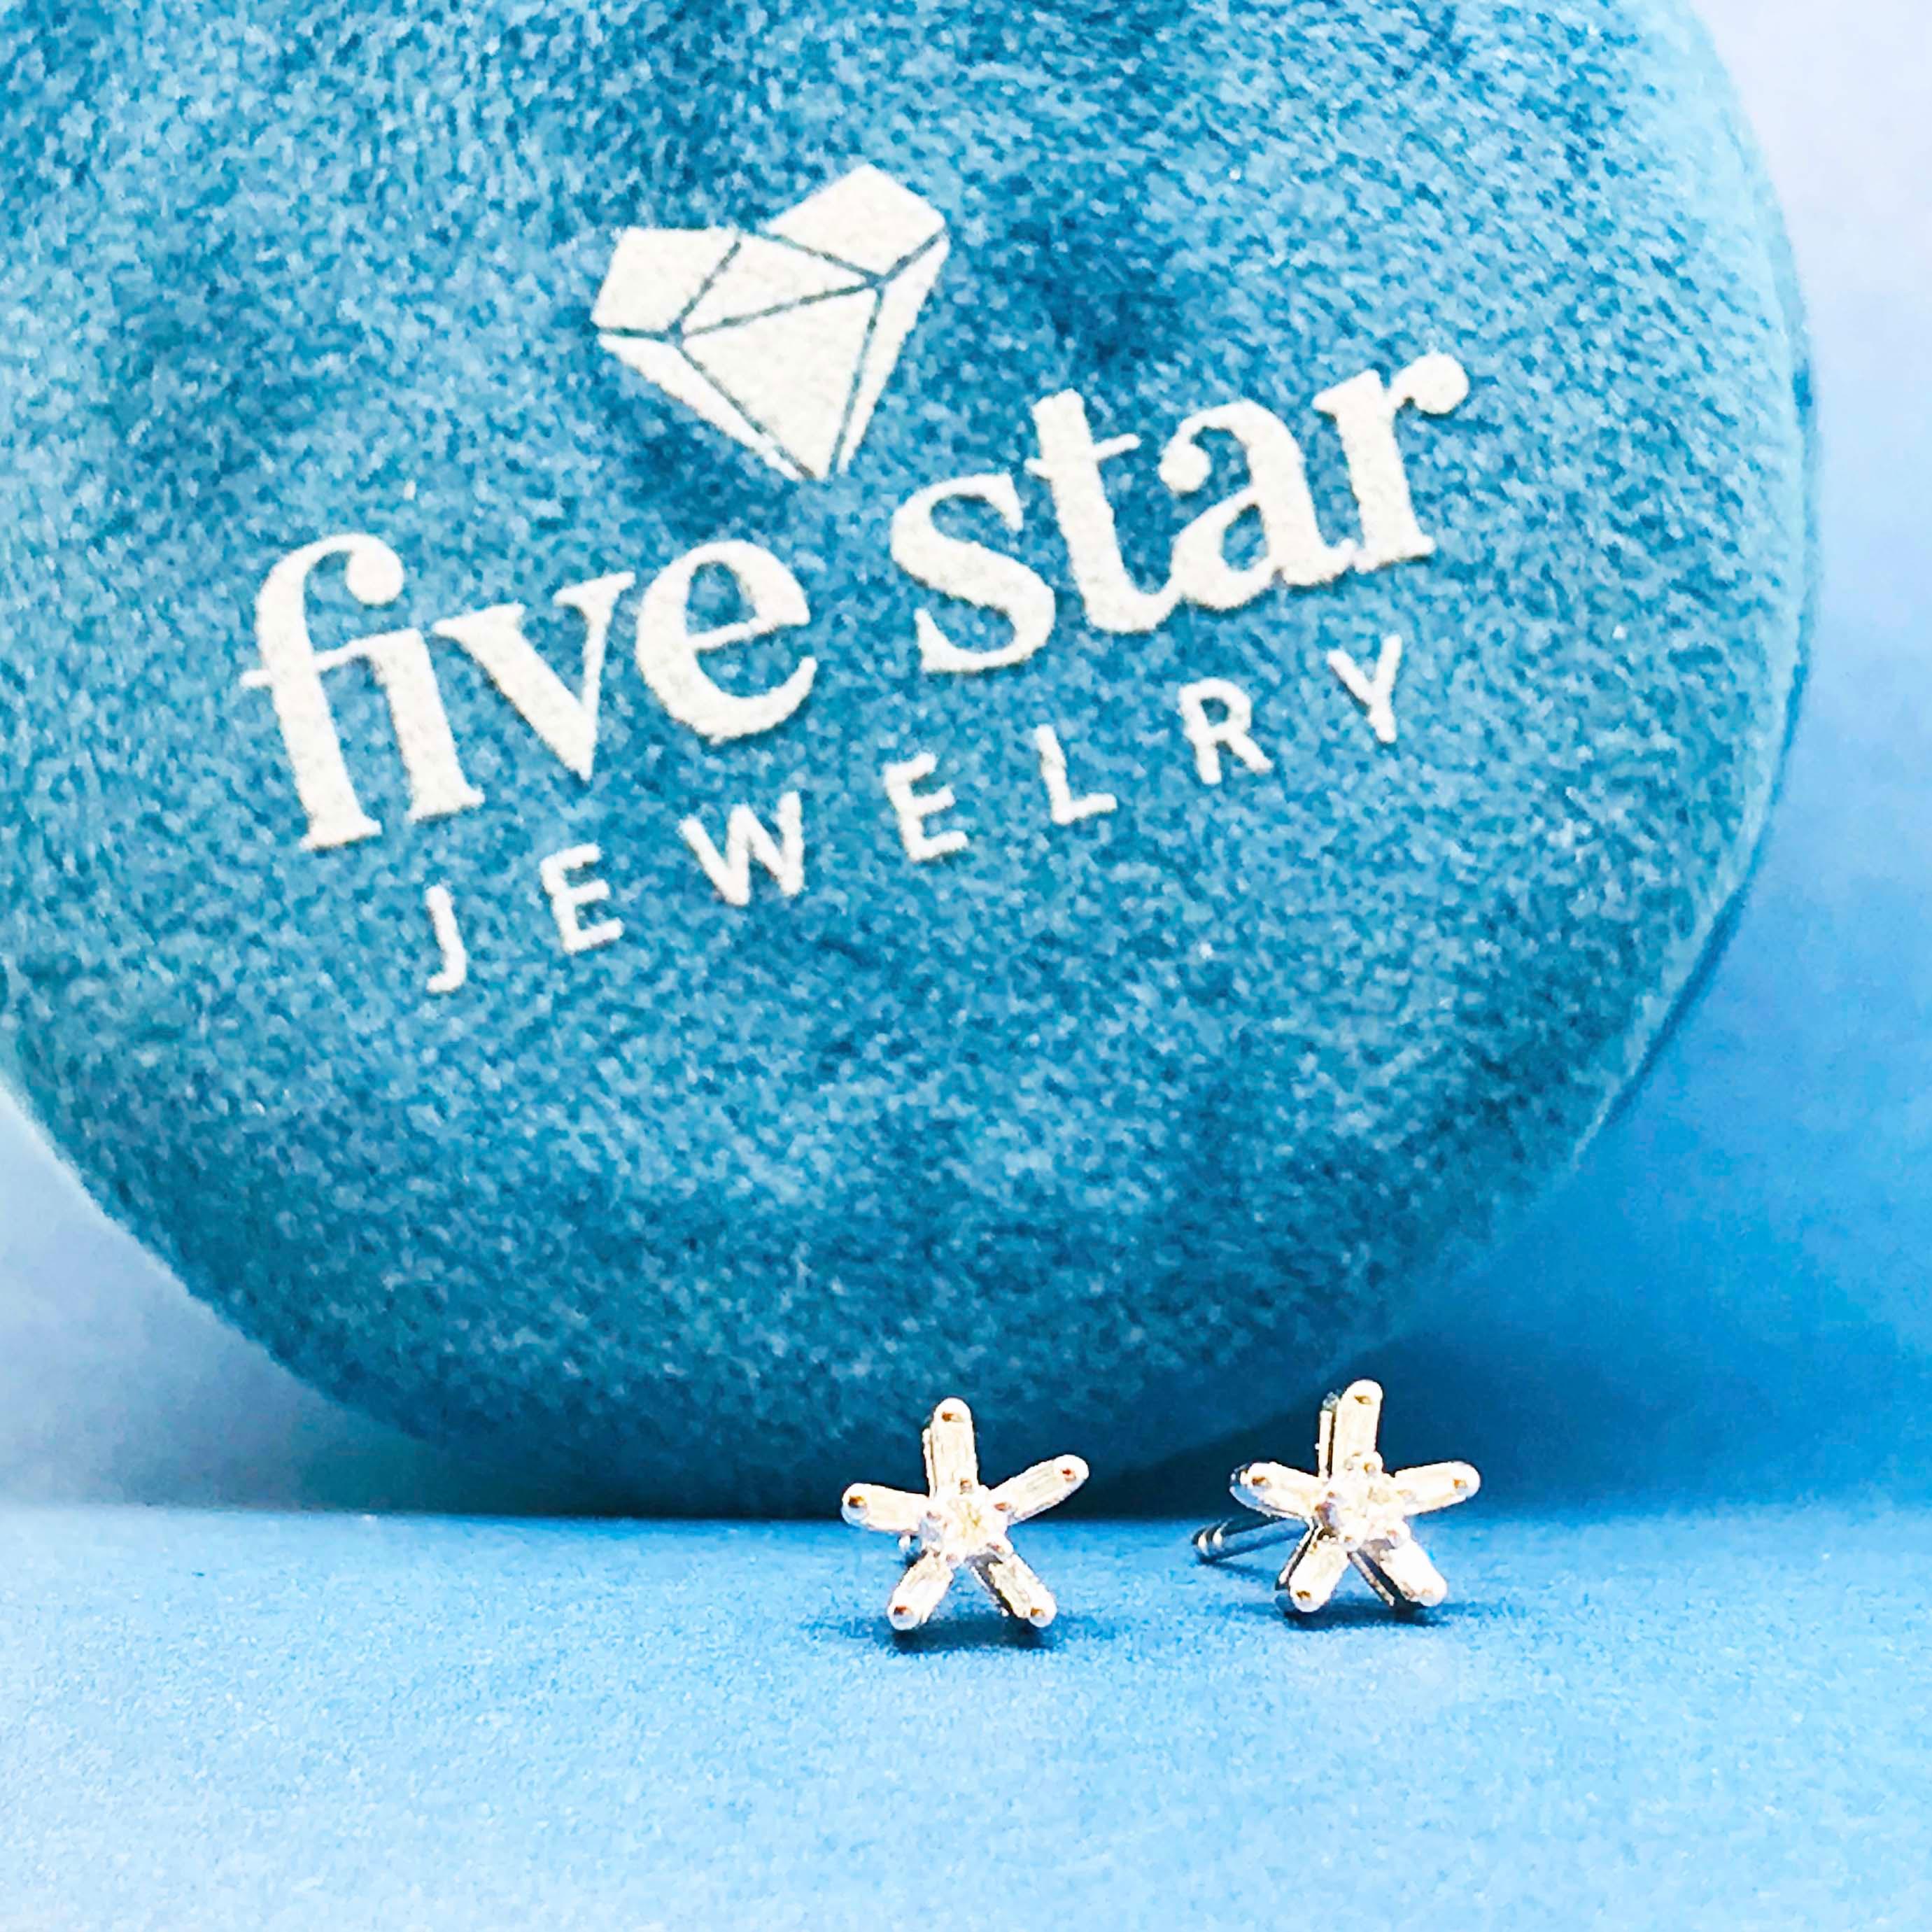 These adorable diamond stud earrings are so cute and fun! The diamond star earring studs have genuine baguette and round diamonds set in a five pointed star design. The earrings are also designed to look like diamond flowers with a round brilliant